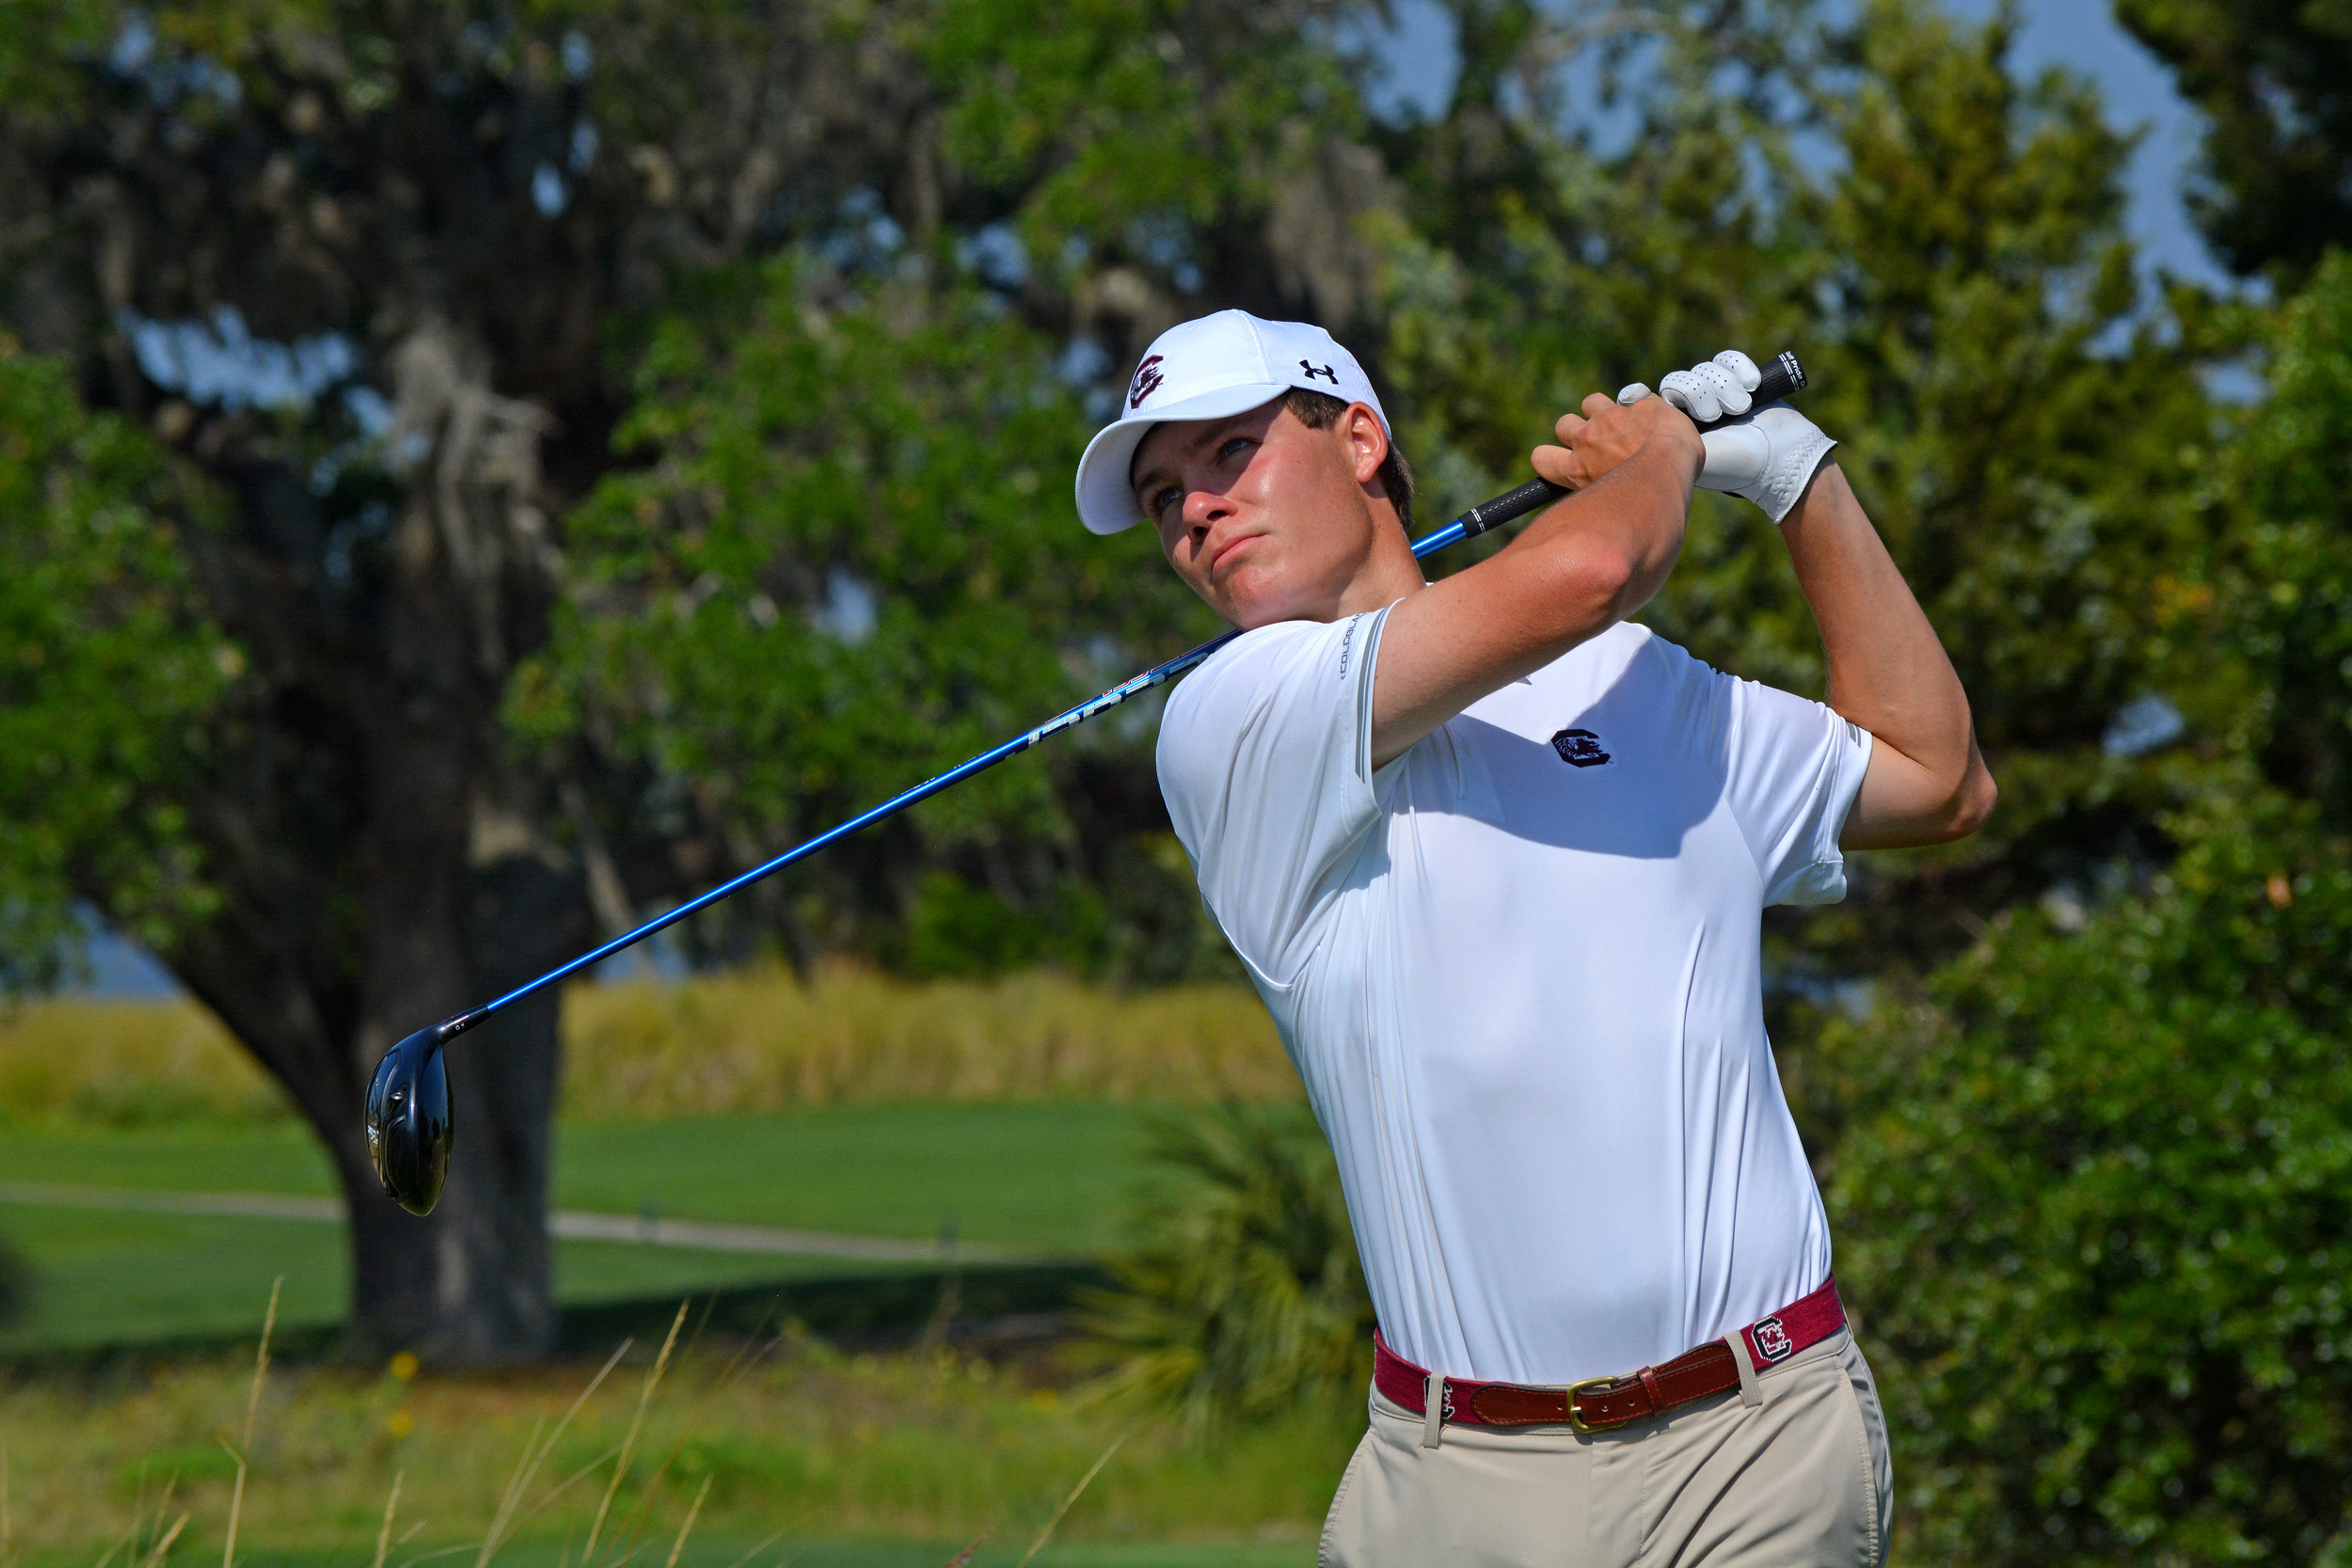 Gamecocks T-7th after R1 of Carpet Capital Collegiate